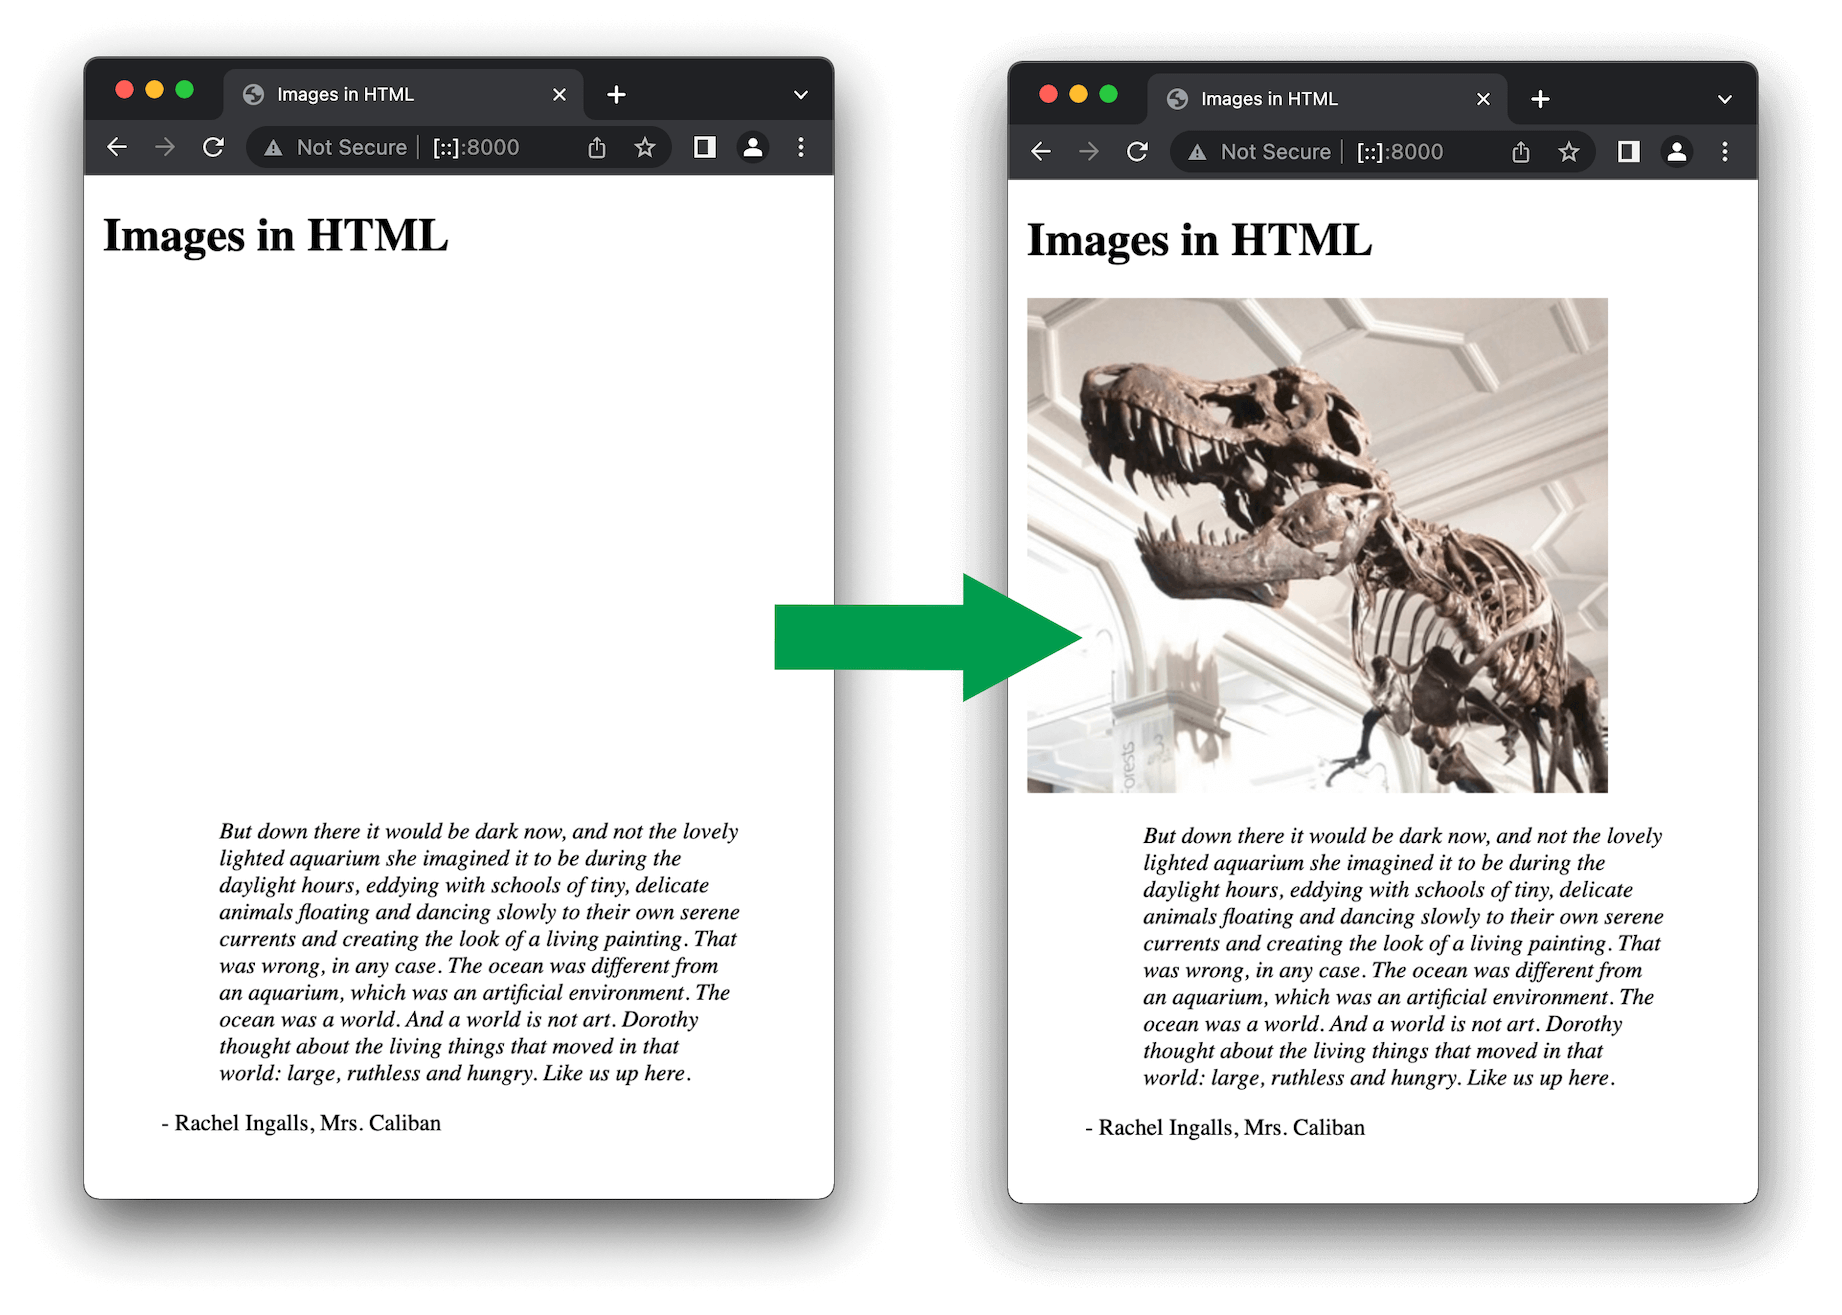 Comparison of page layout while the browser is loading a page and when it has finished, when the image size is specified.